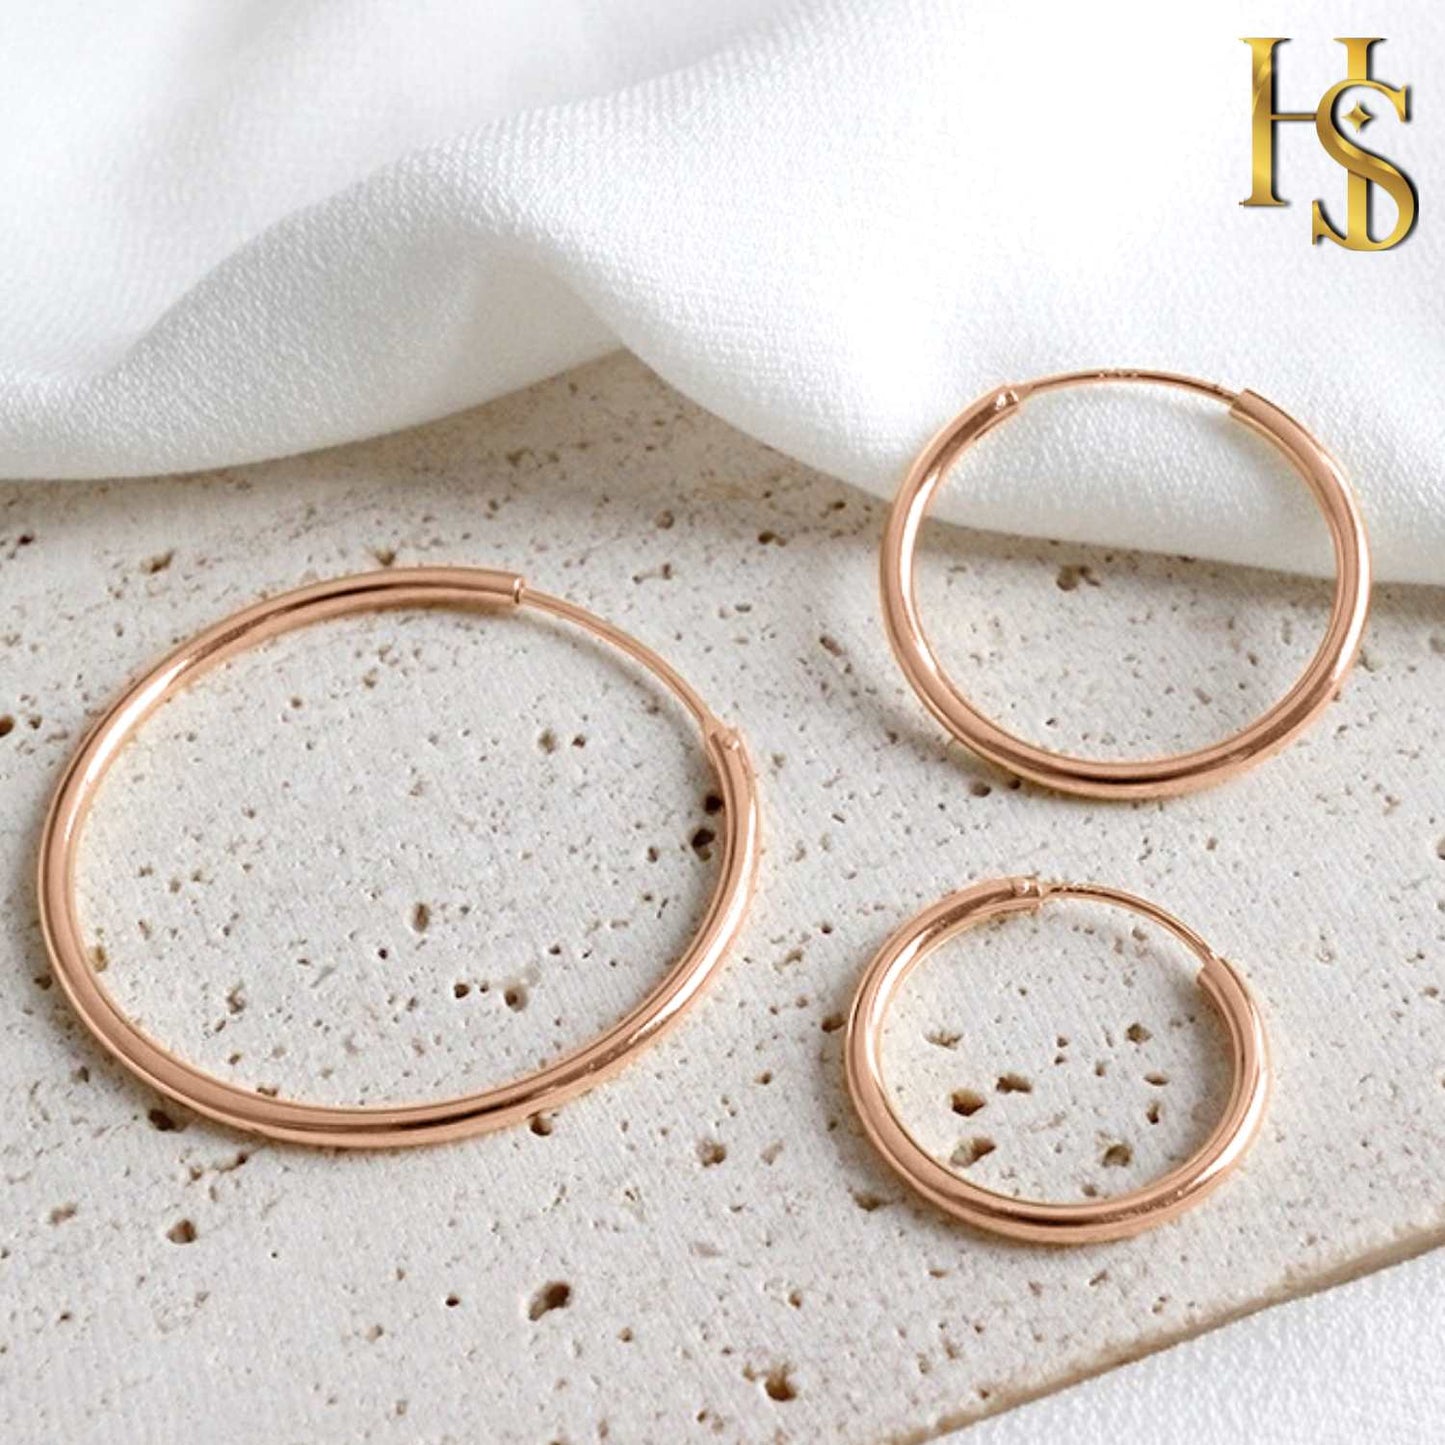 Classic Rose Gold Hoop Earrings in 92.5 Silver - 1.2mm Thickness - Small Sizes 10mm to 20mm -  18K Rose Gold finish